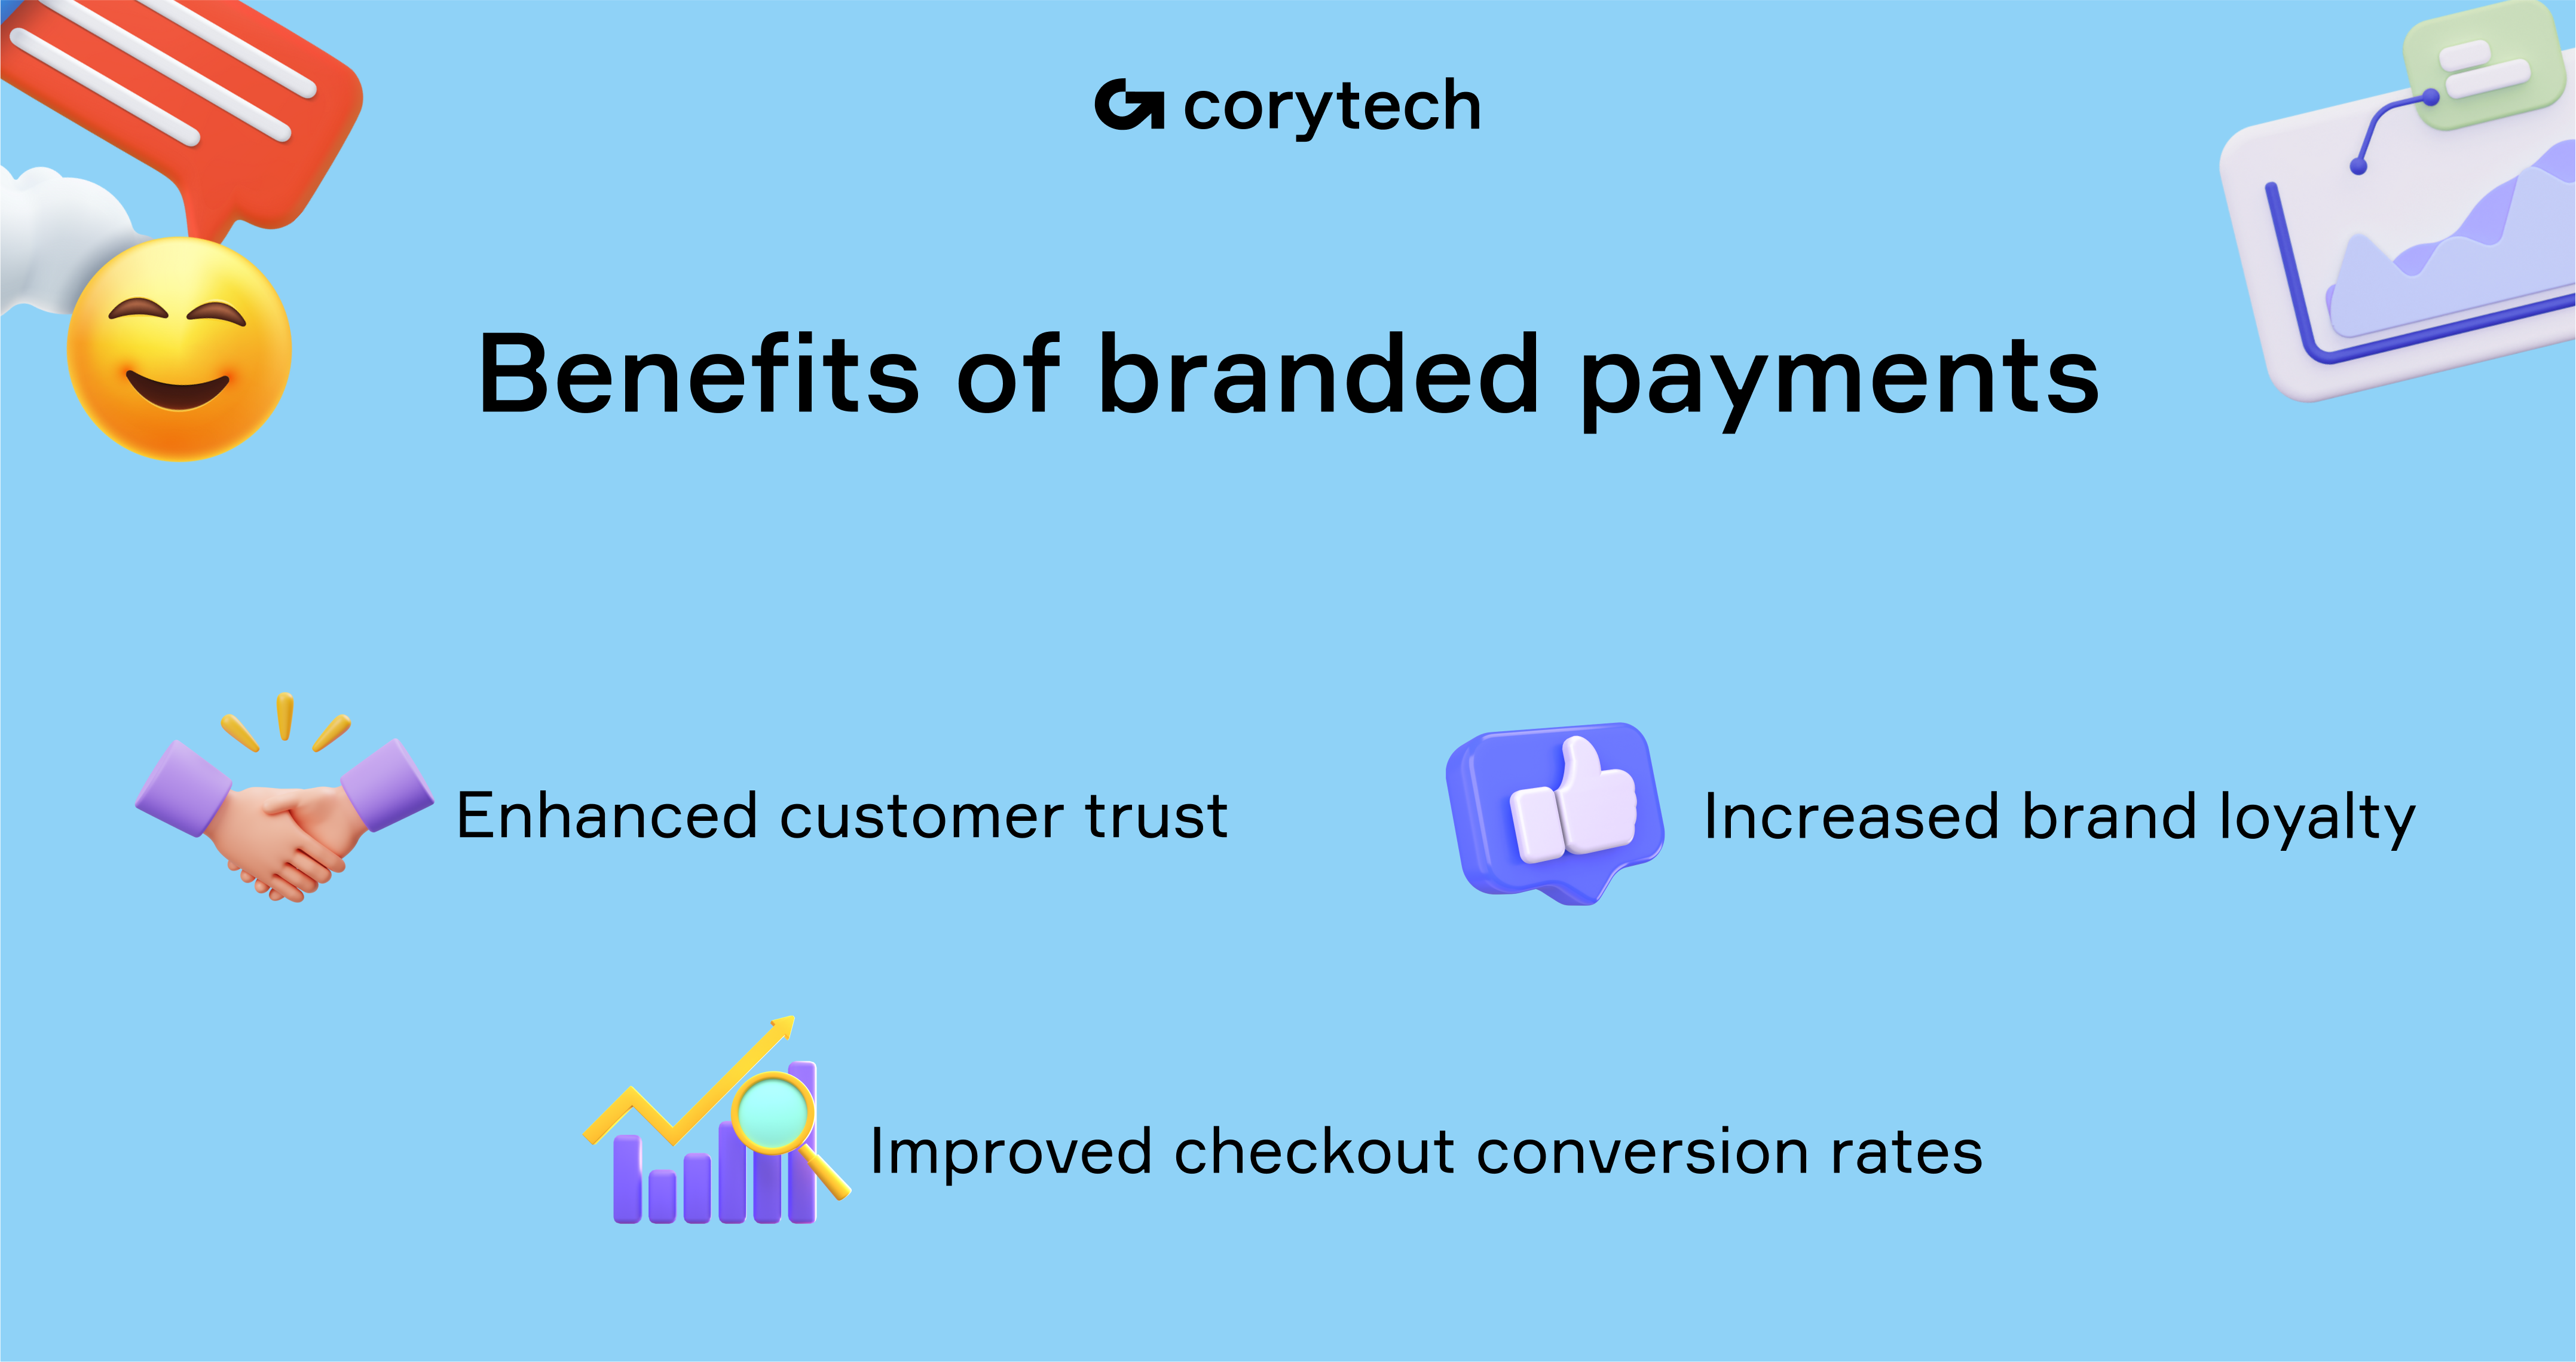 Benefits of branded payments